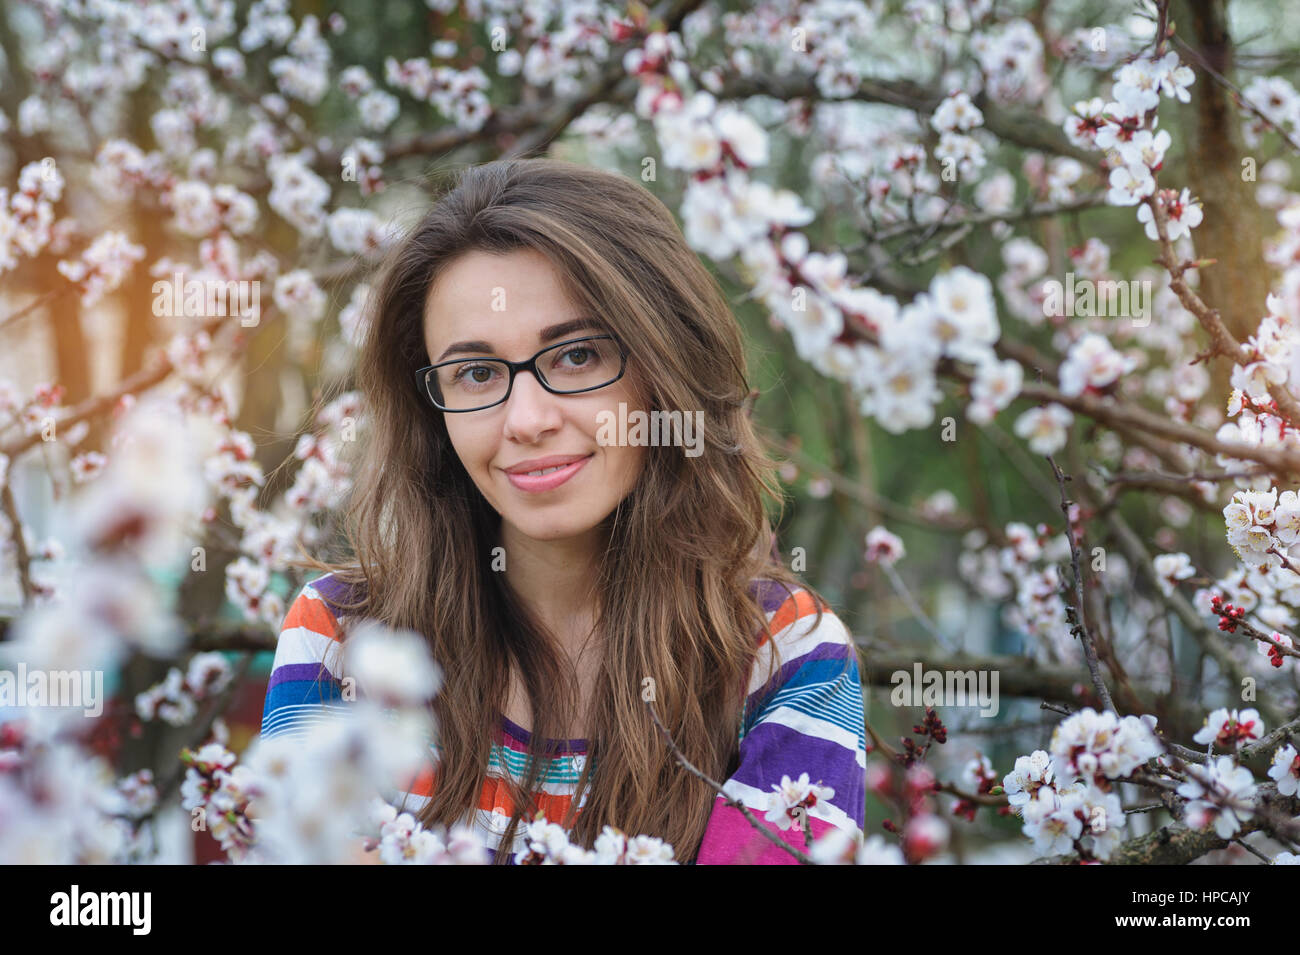 smiling young woman in the blossoming spring garden Stock Photo